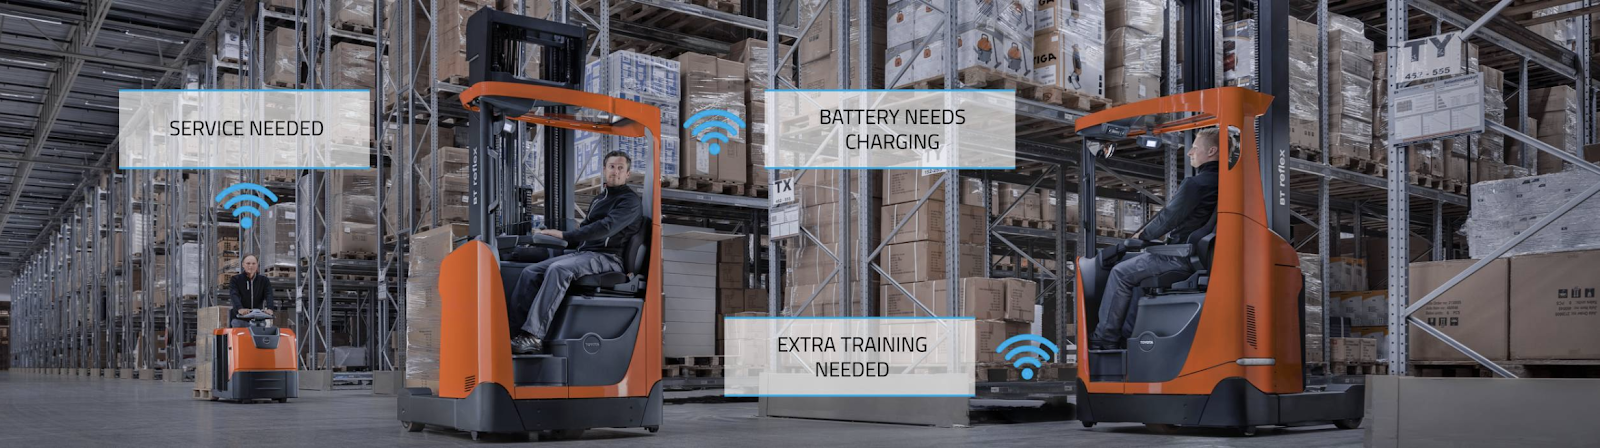 Toyota Material Handling Goes All-In on Networked Forklifts, as Factory Automation Booms